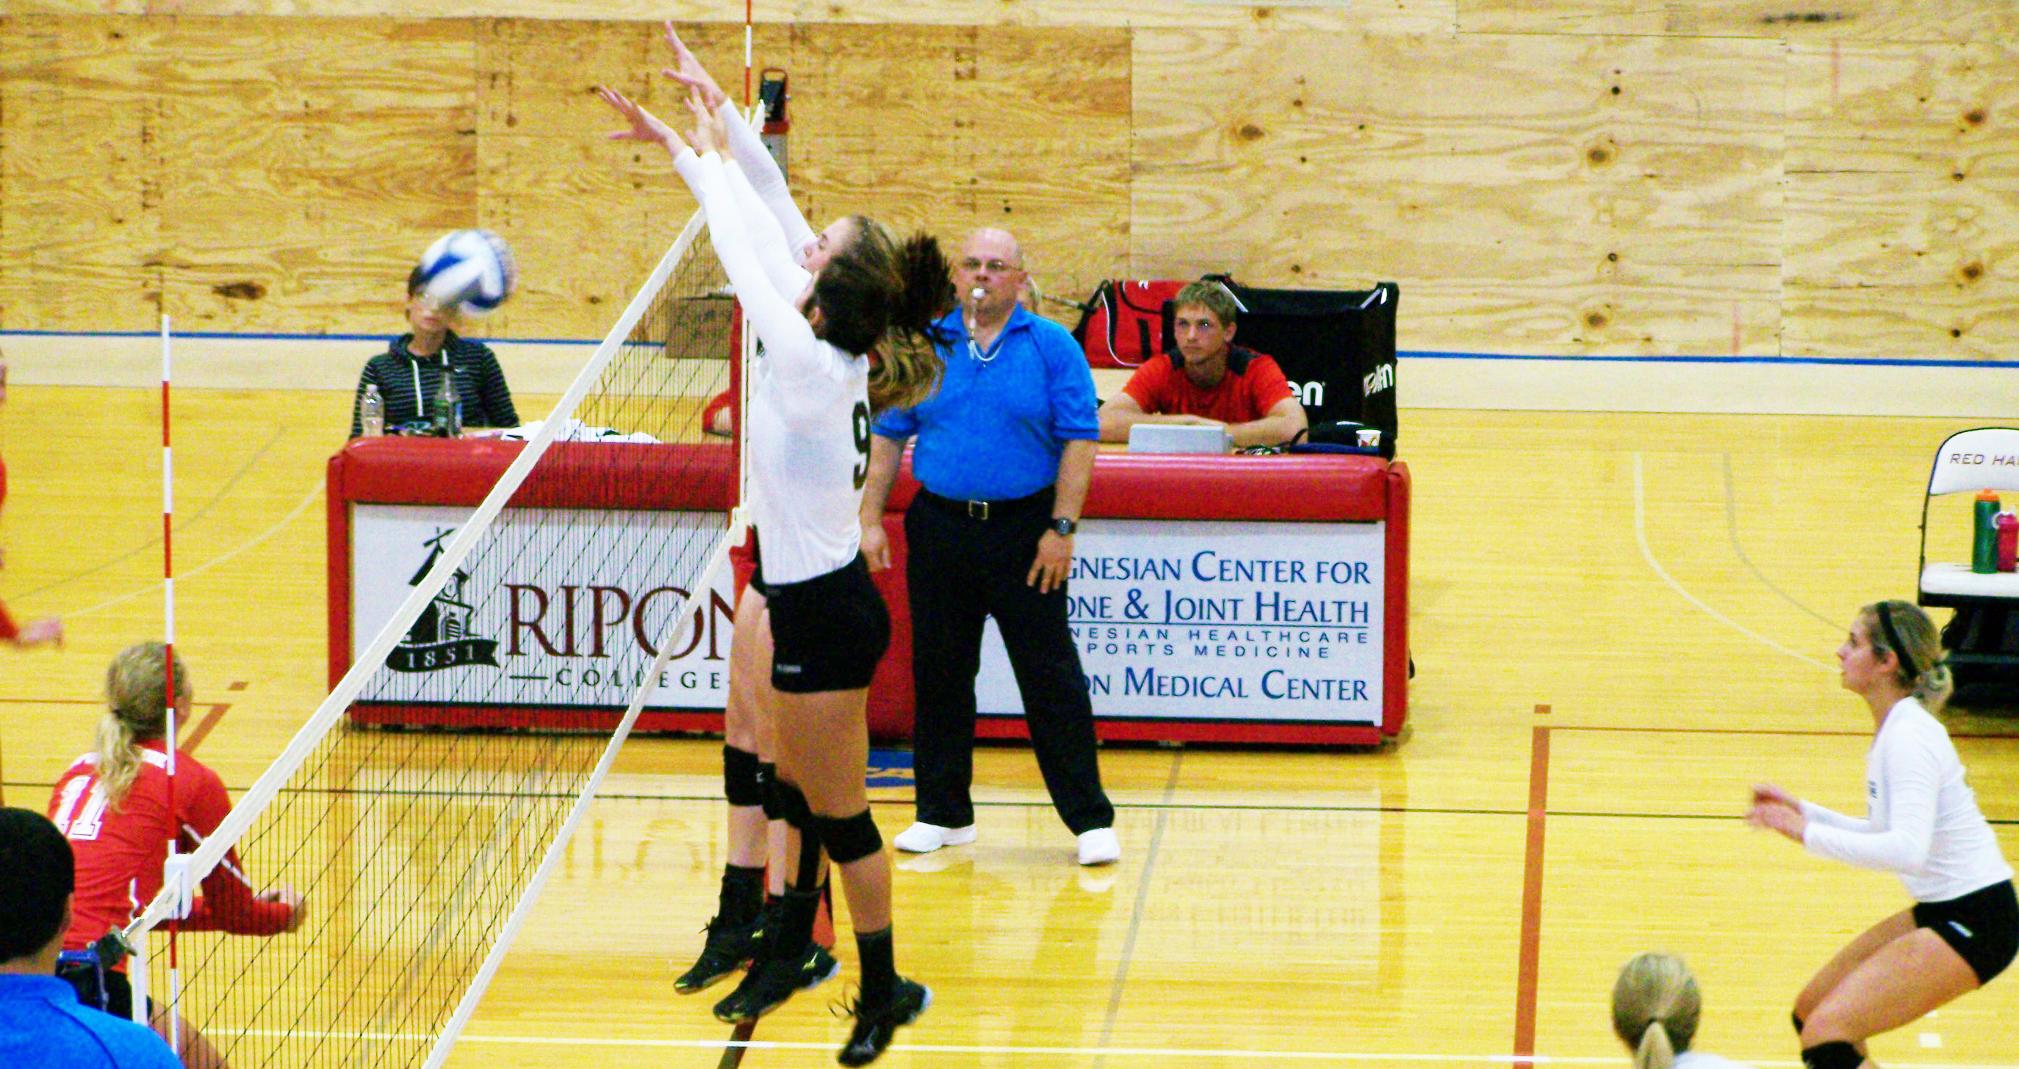 Brooke Brinkman assisted on three blocks while totaling a pair of kills in one set played against the Red Hawks.